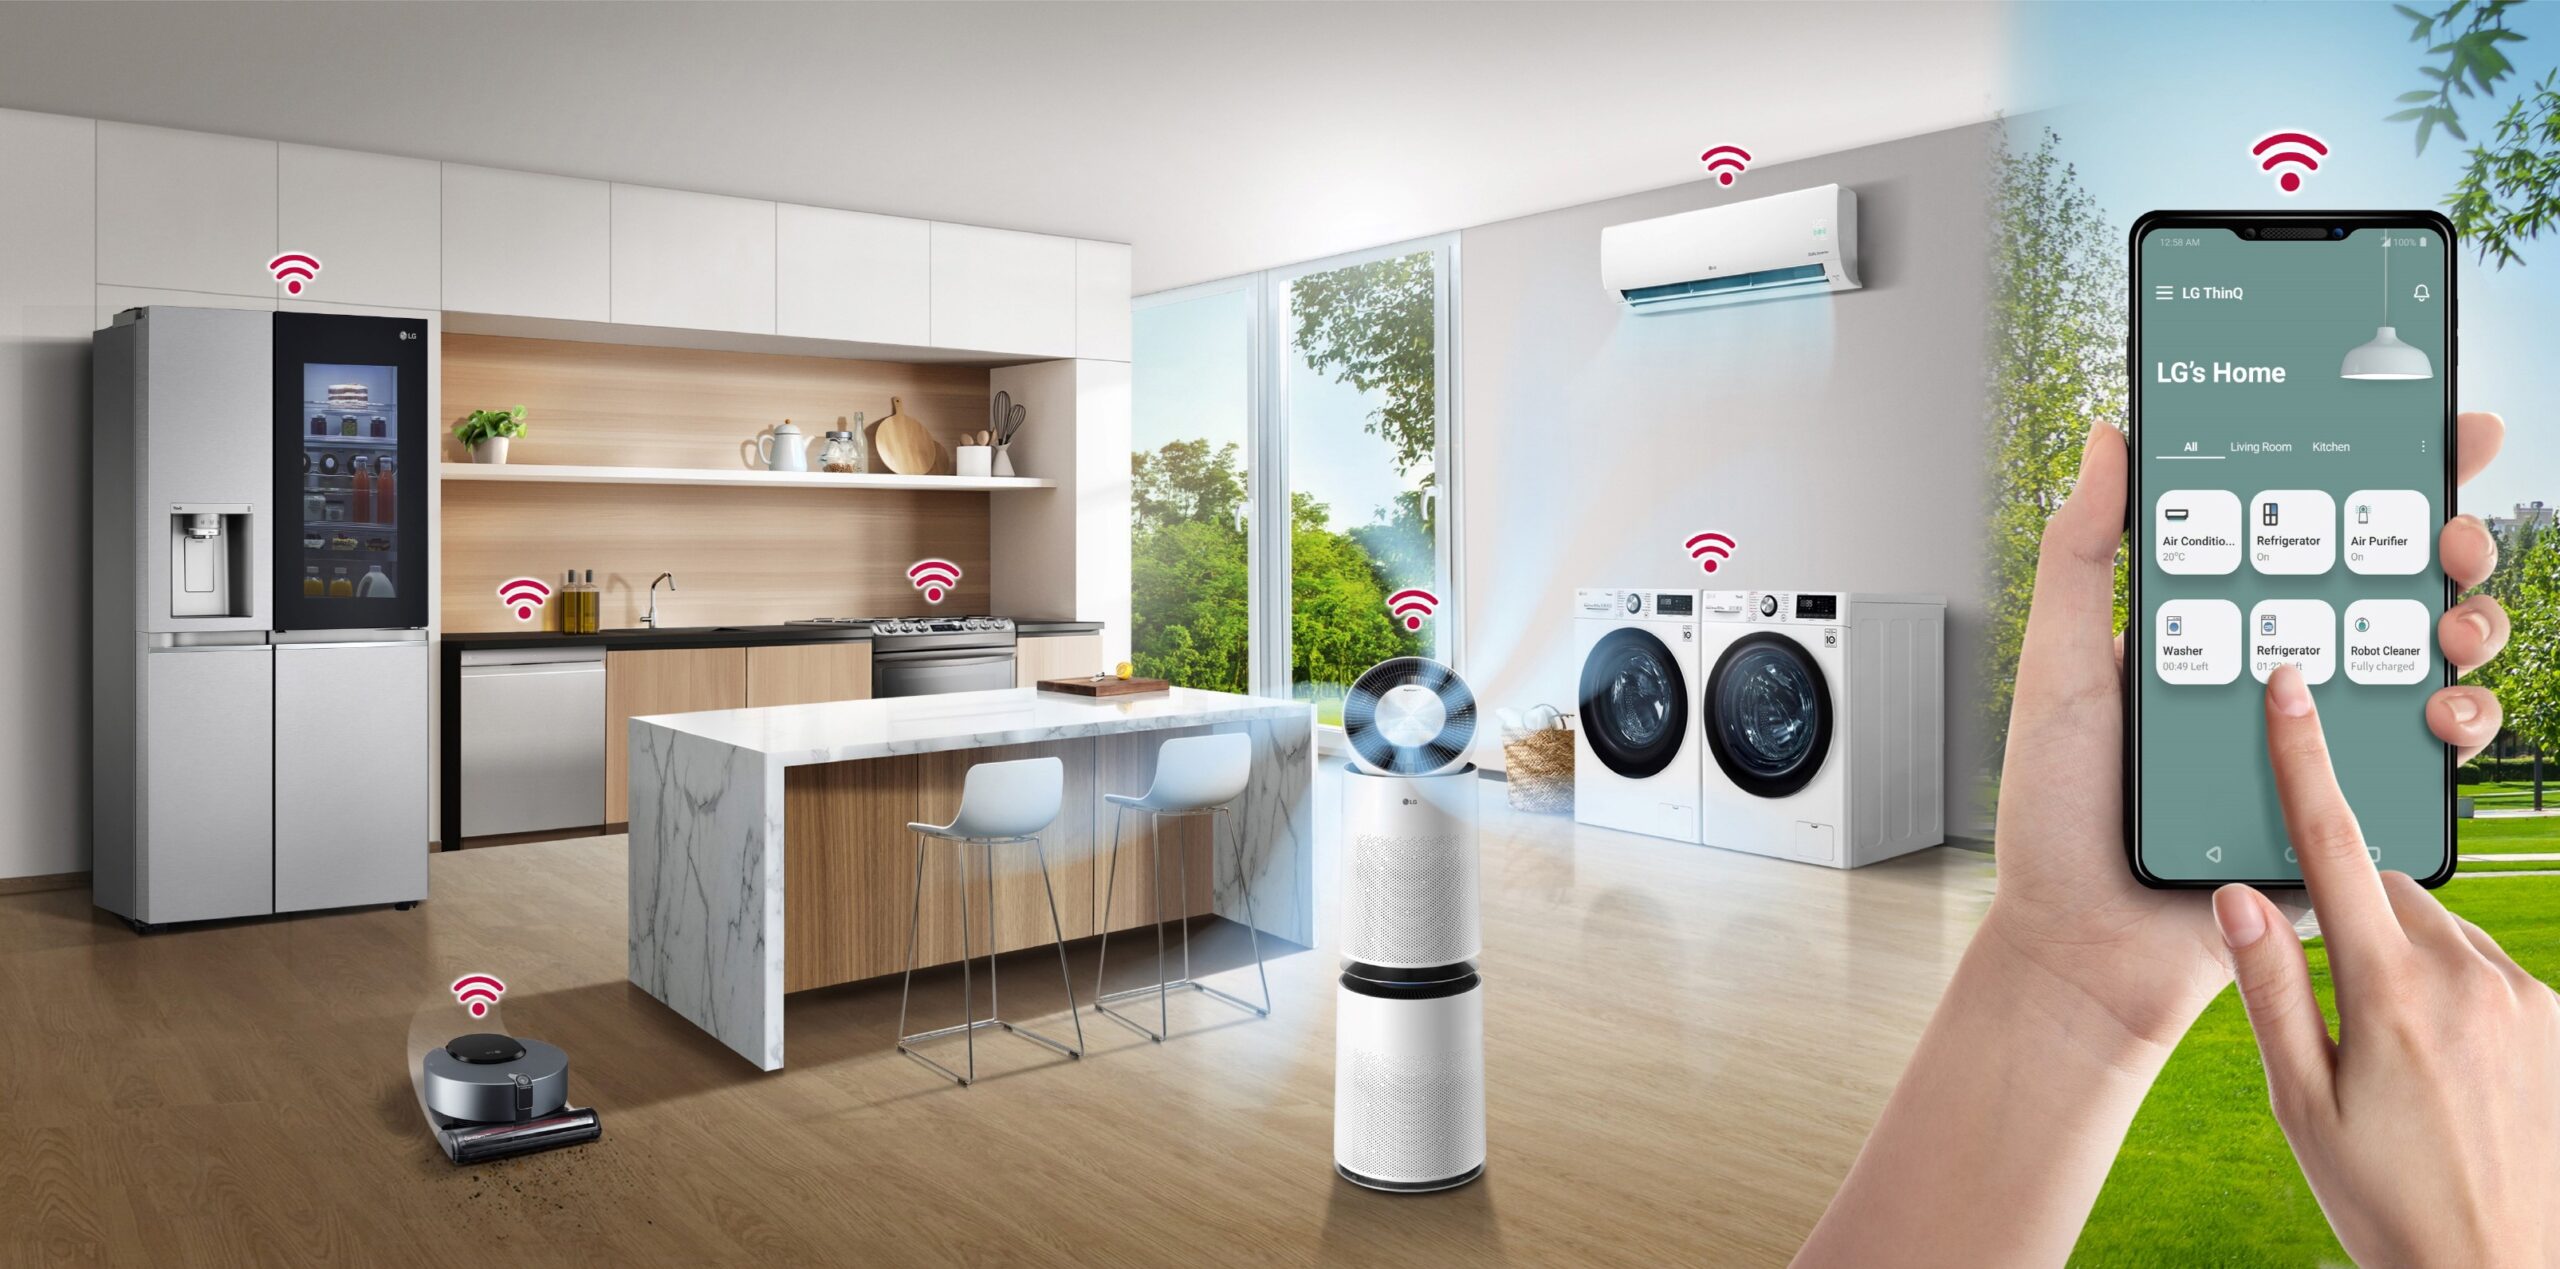 Presenting the More Effective, Accessible Smart Home With LG ThinQ LG